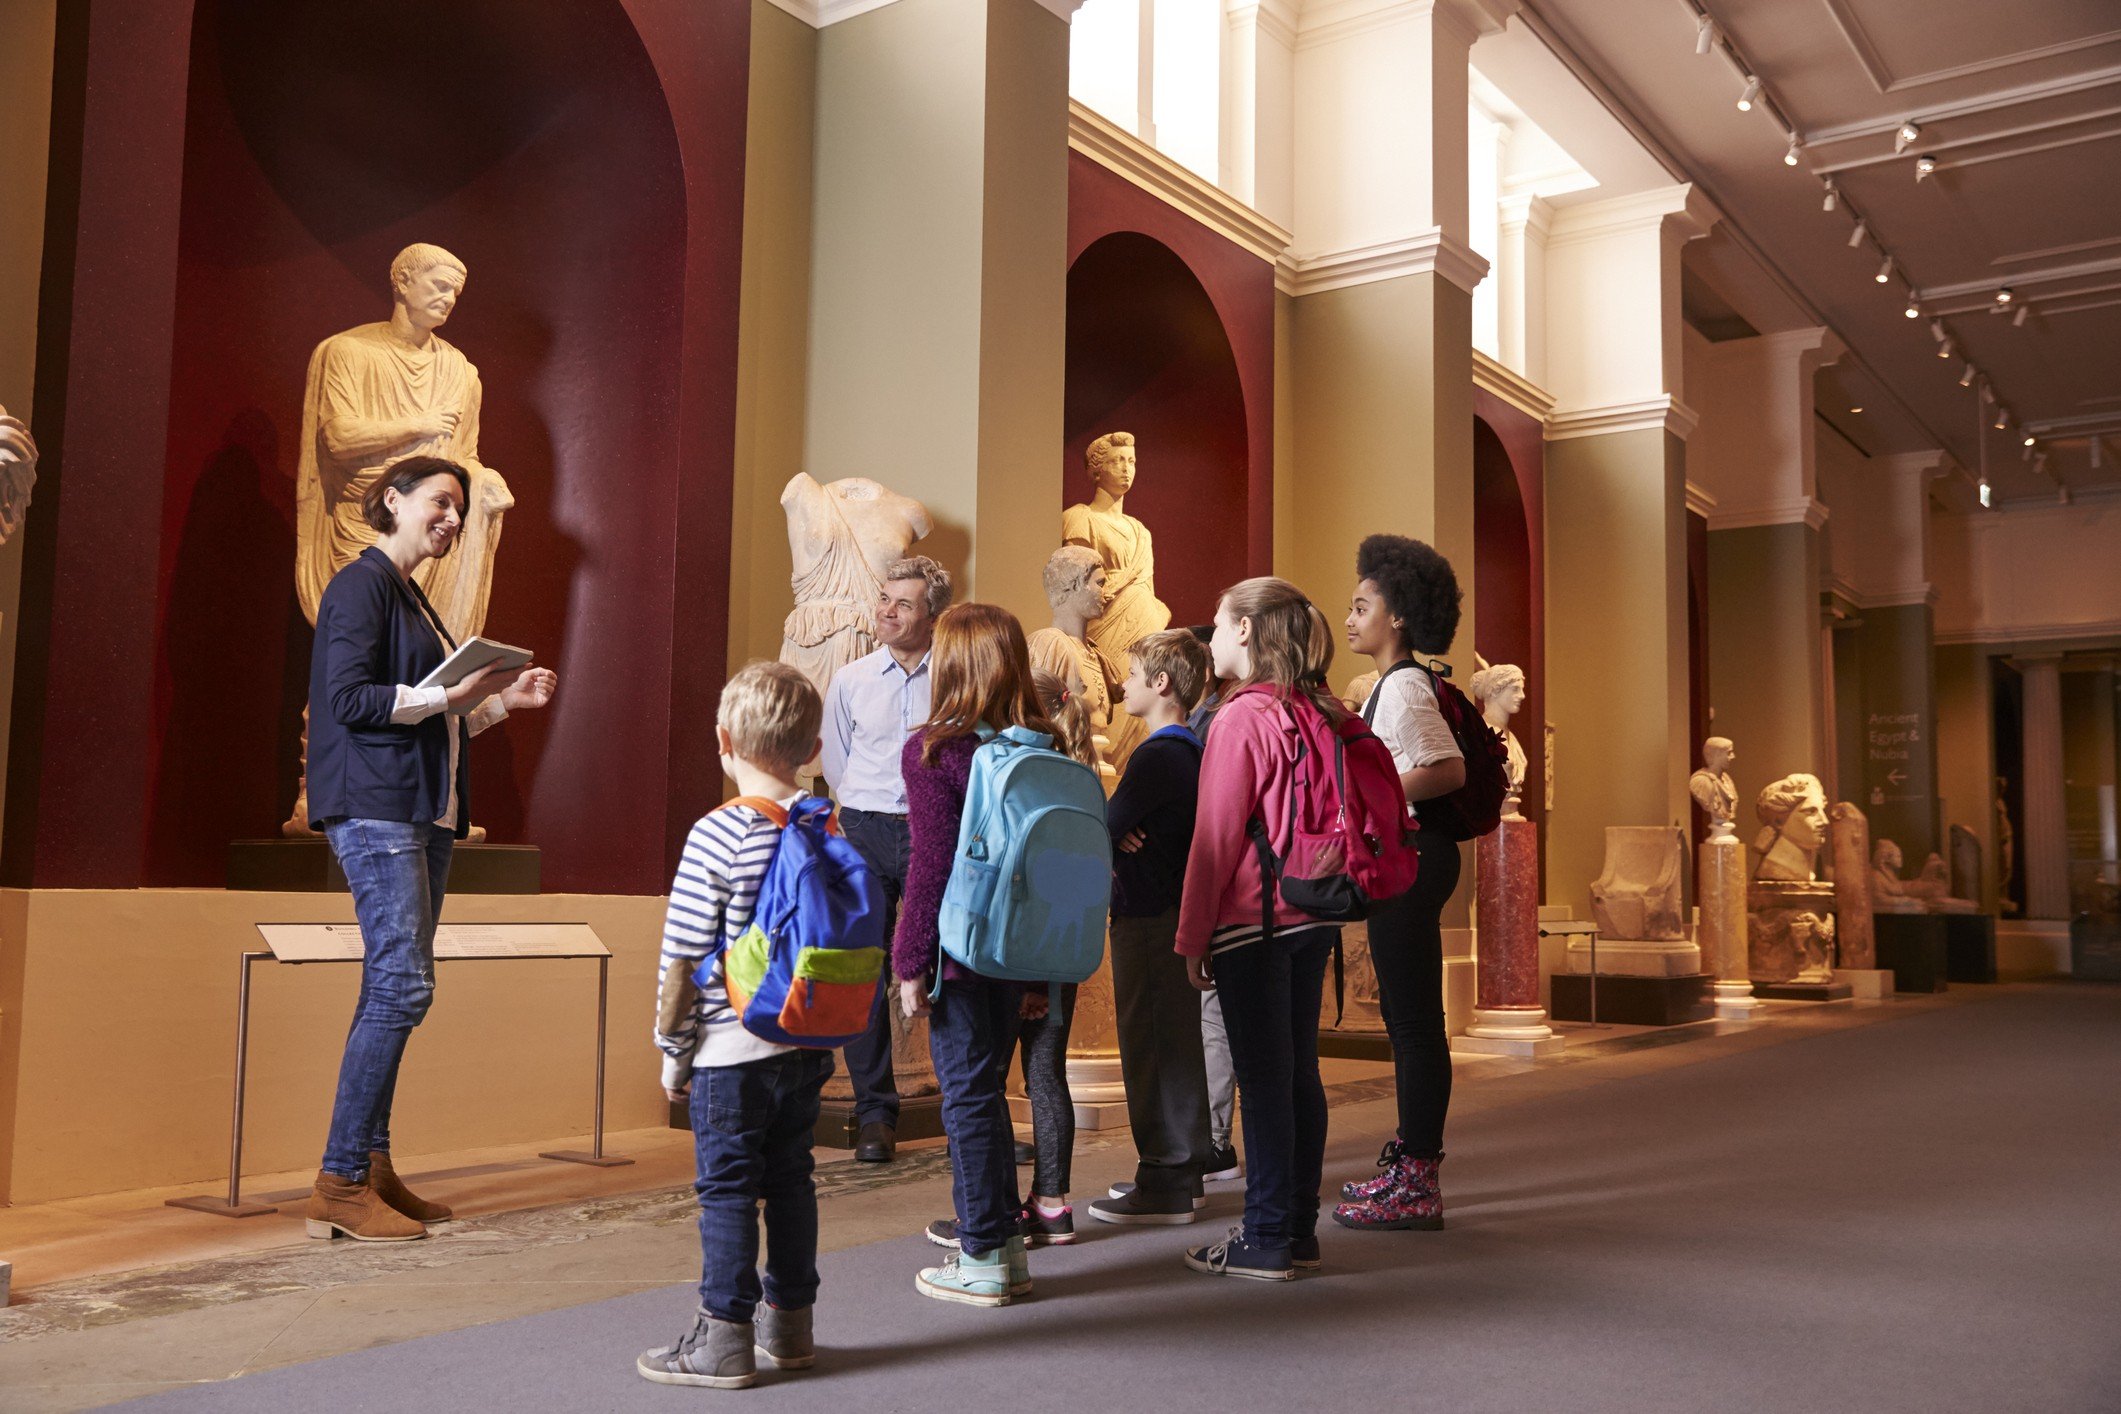 Children and tour guide discuss museum